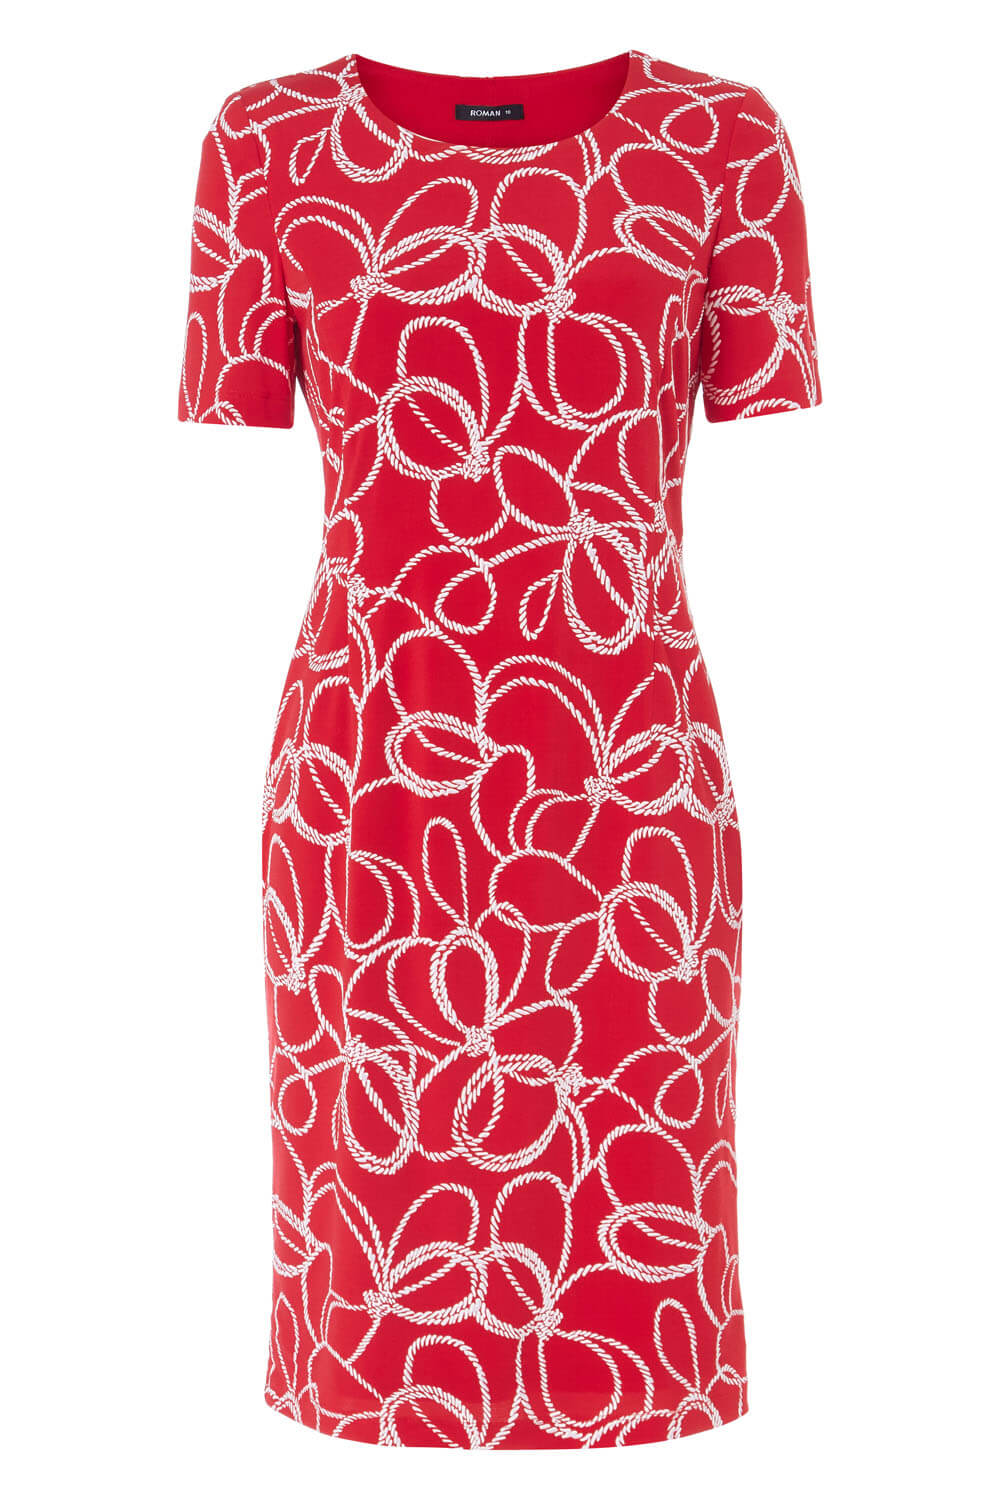 Red Nautical Rope Print Shift Dress, Image 4 of 4